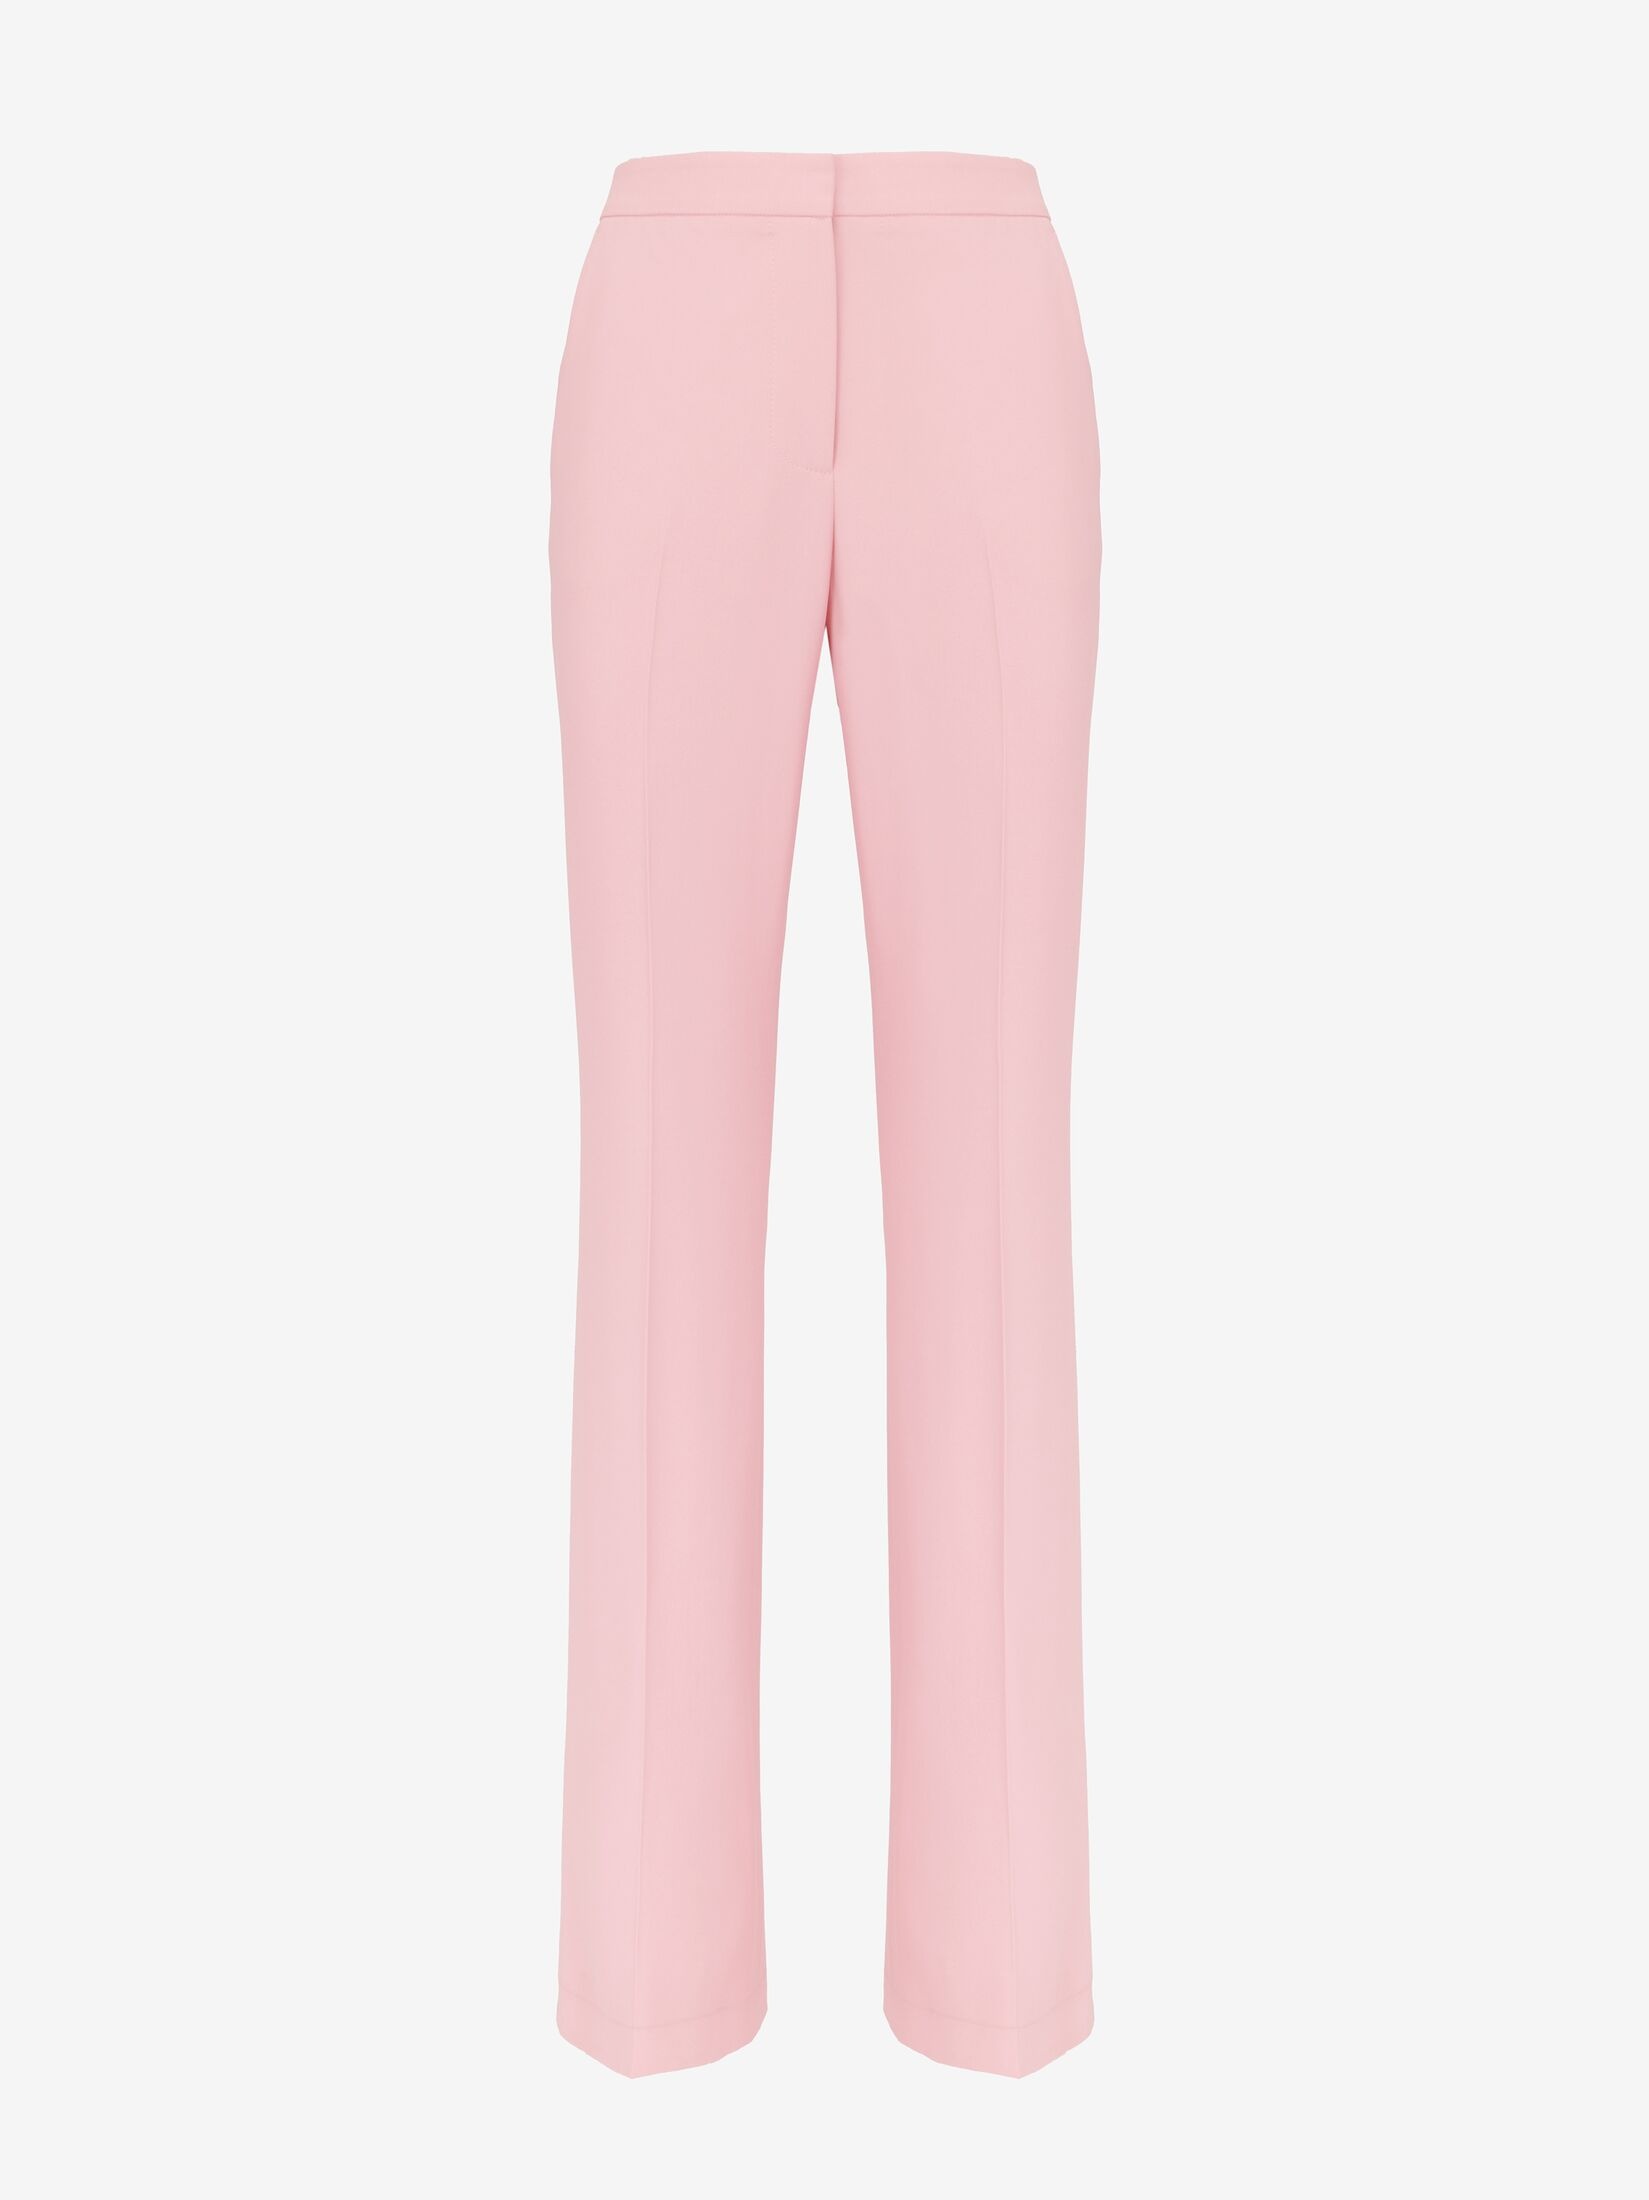 Women's High-waisted Narrow Bootcut Trousers in Cherry Blossom Pink - 1